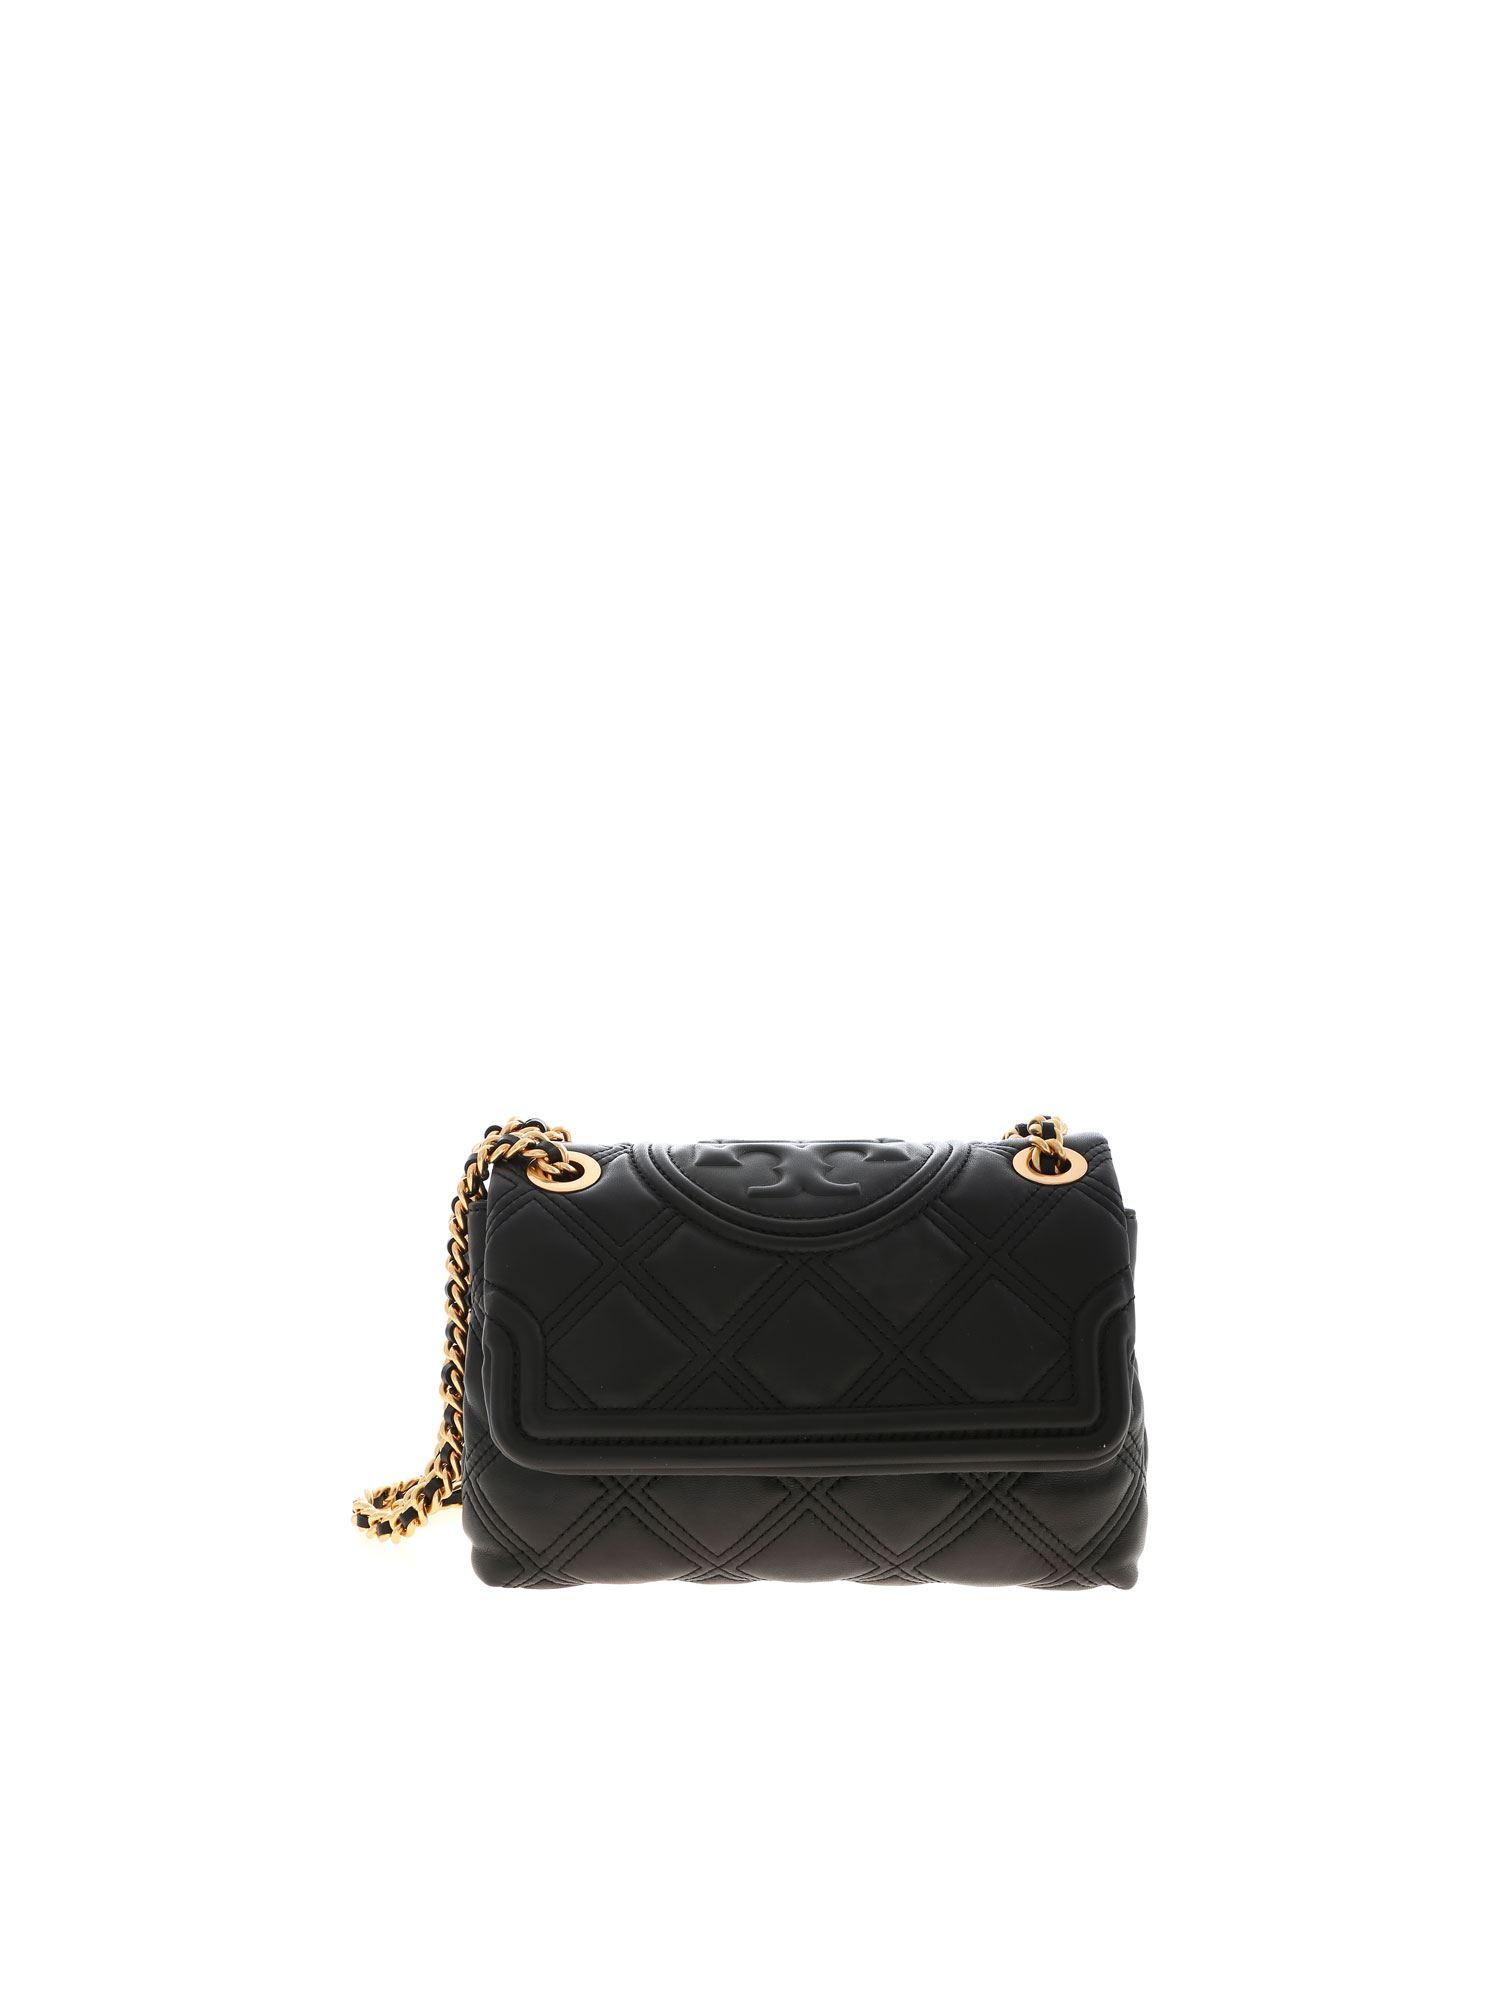 Tory Burch Leather Fleming Convertible Soft Small Bag In Black - Lyst